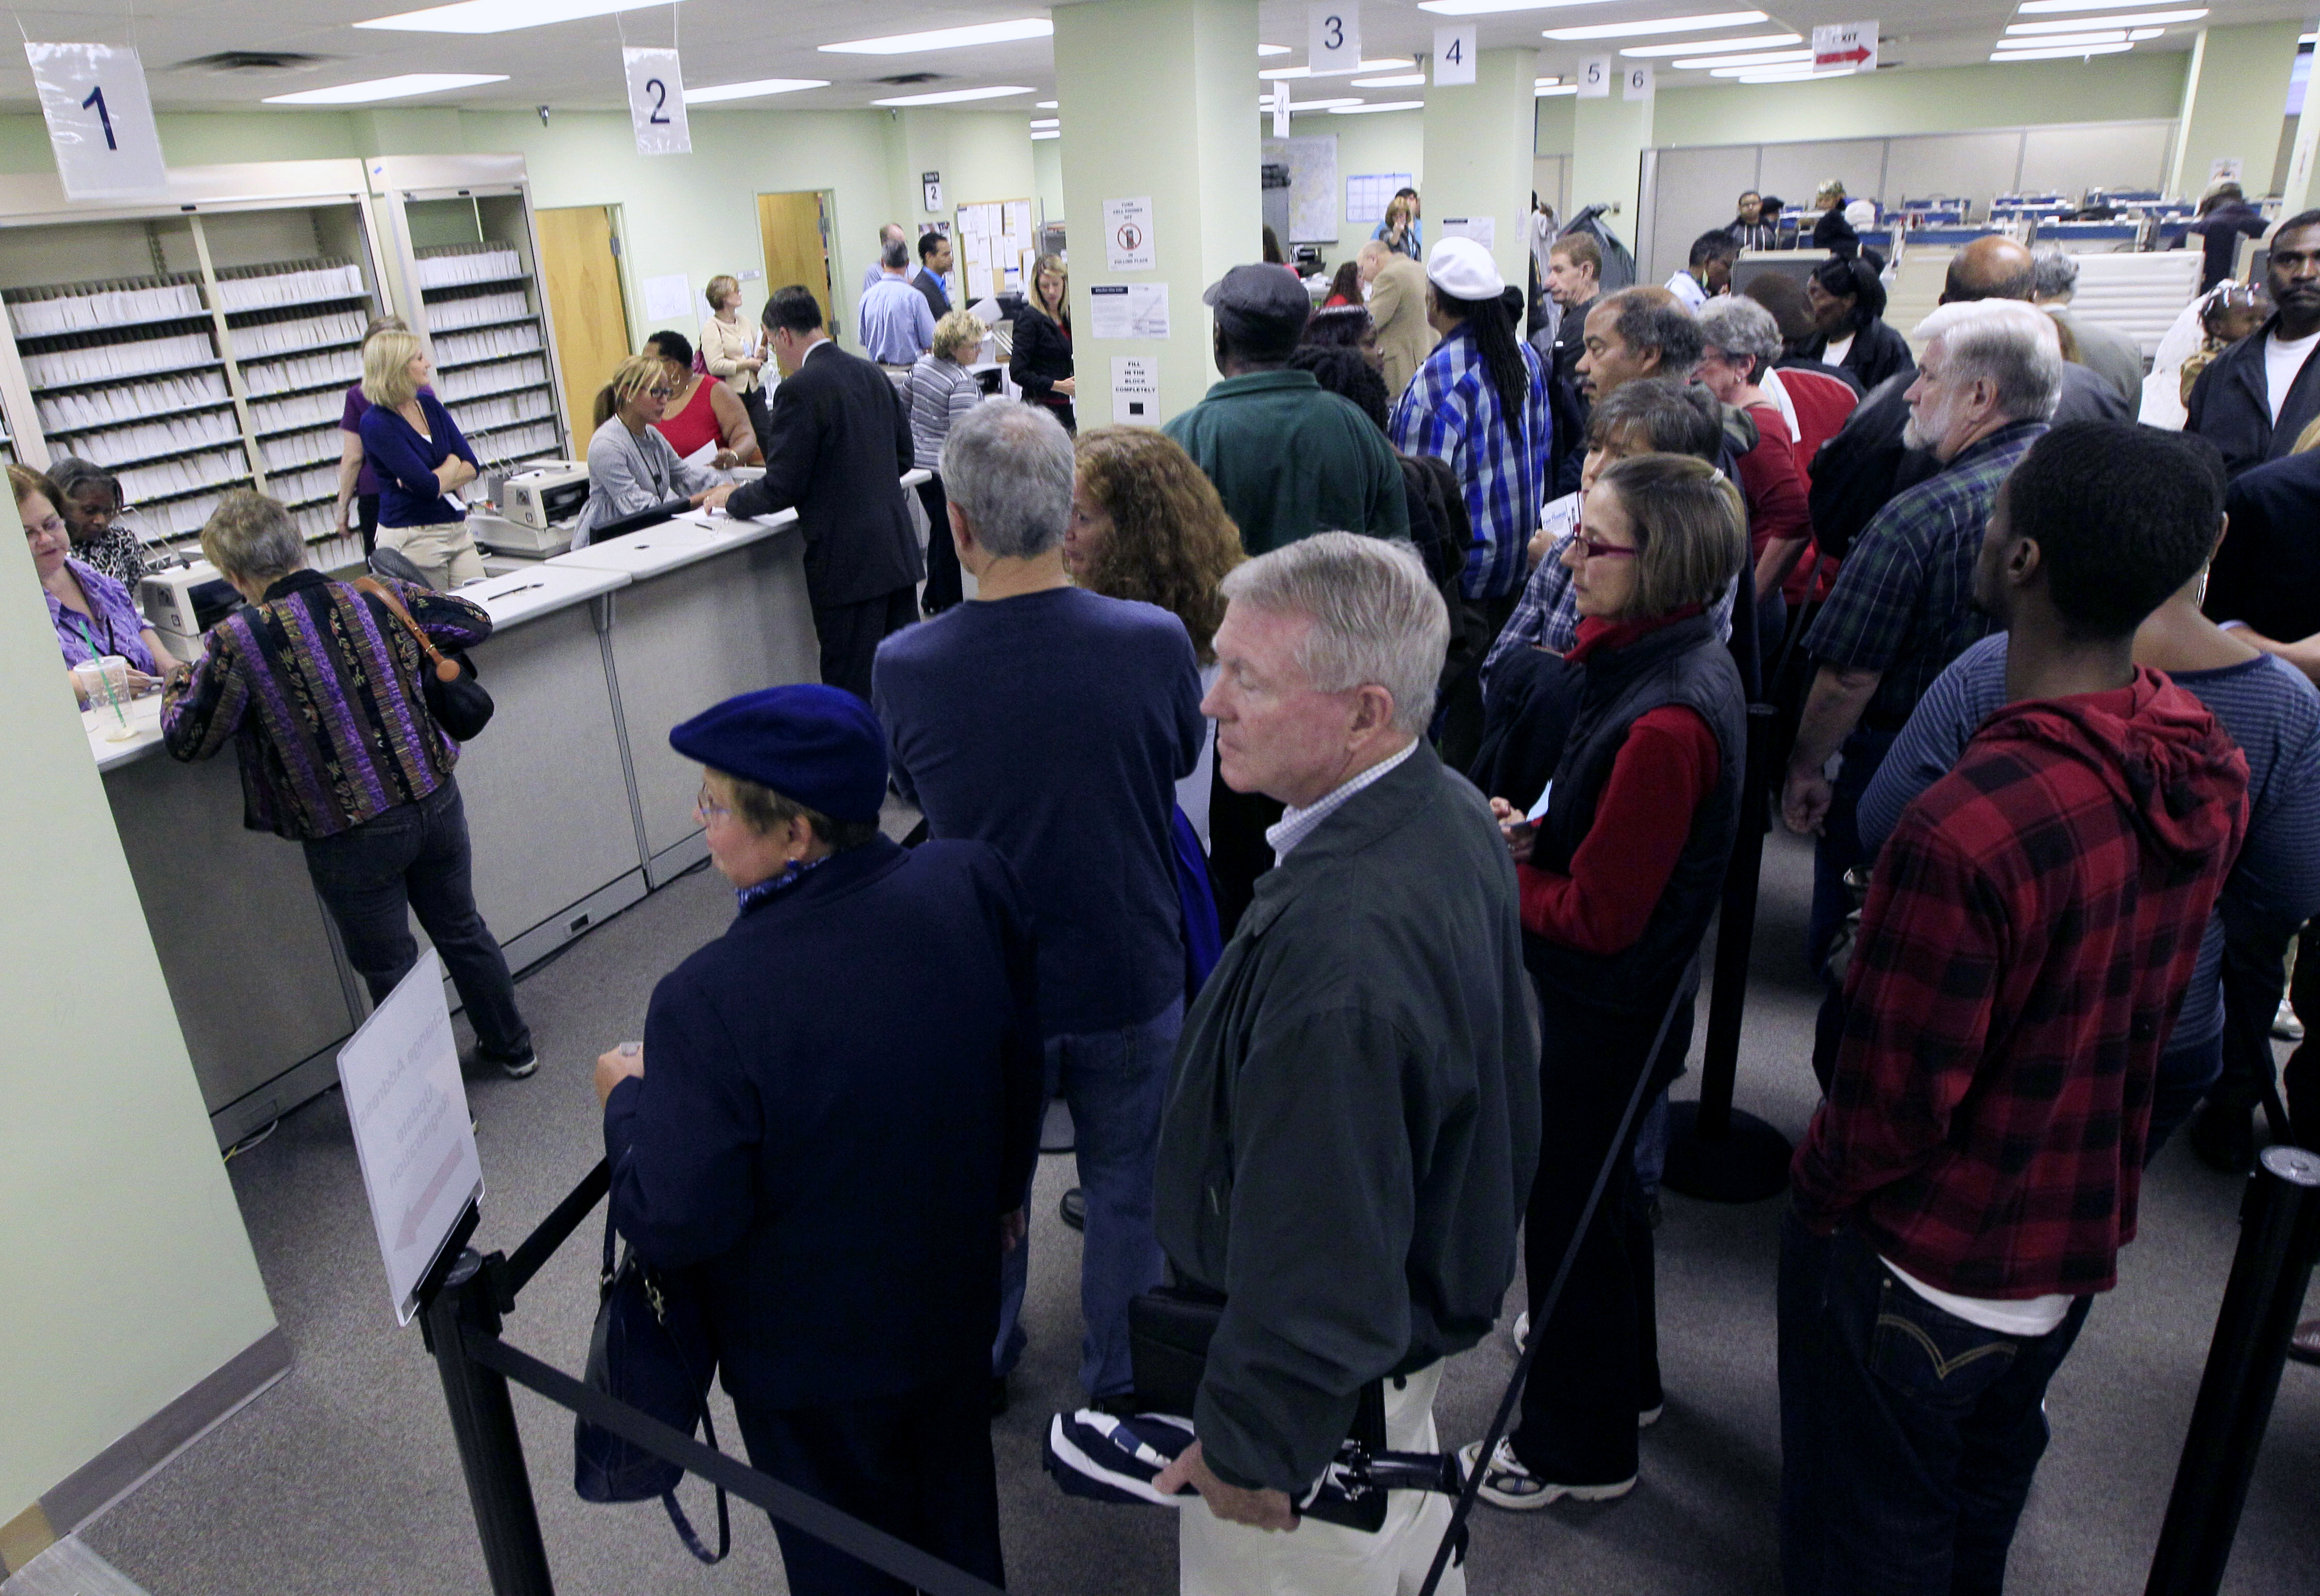 This Oct. 2, 2012 file photo shows voters waiting in line to pick up their ballots inside the Hamilton County Board of Elections after it opened for early voting, in Cincinnati.